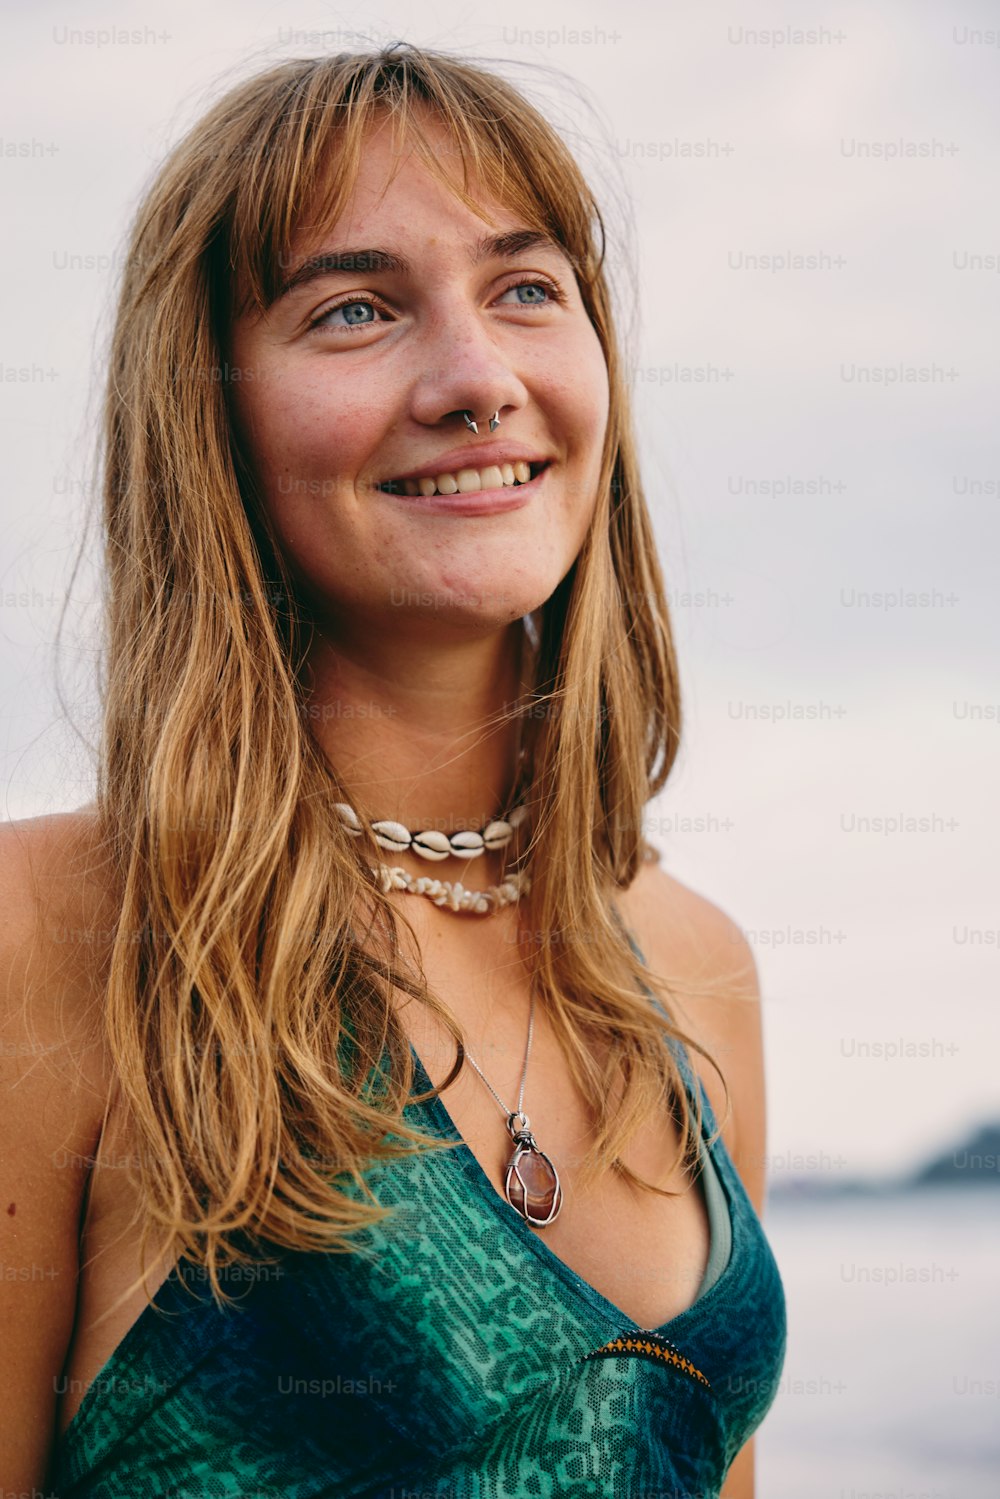 a woman in a green top smiling at the camera